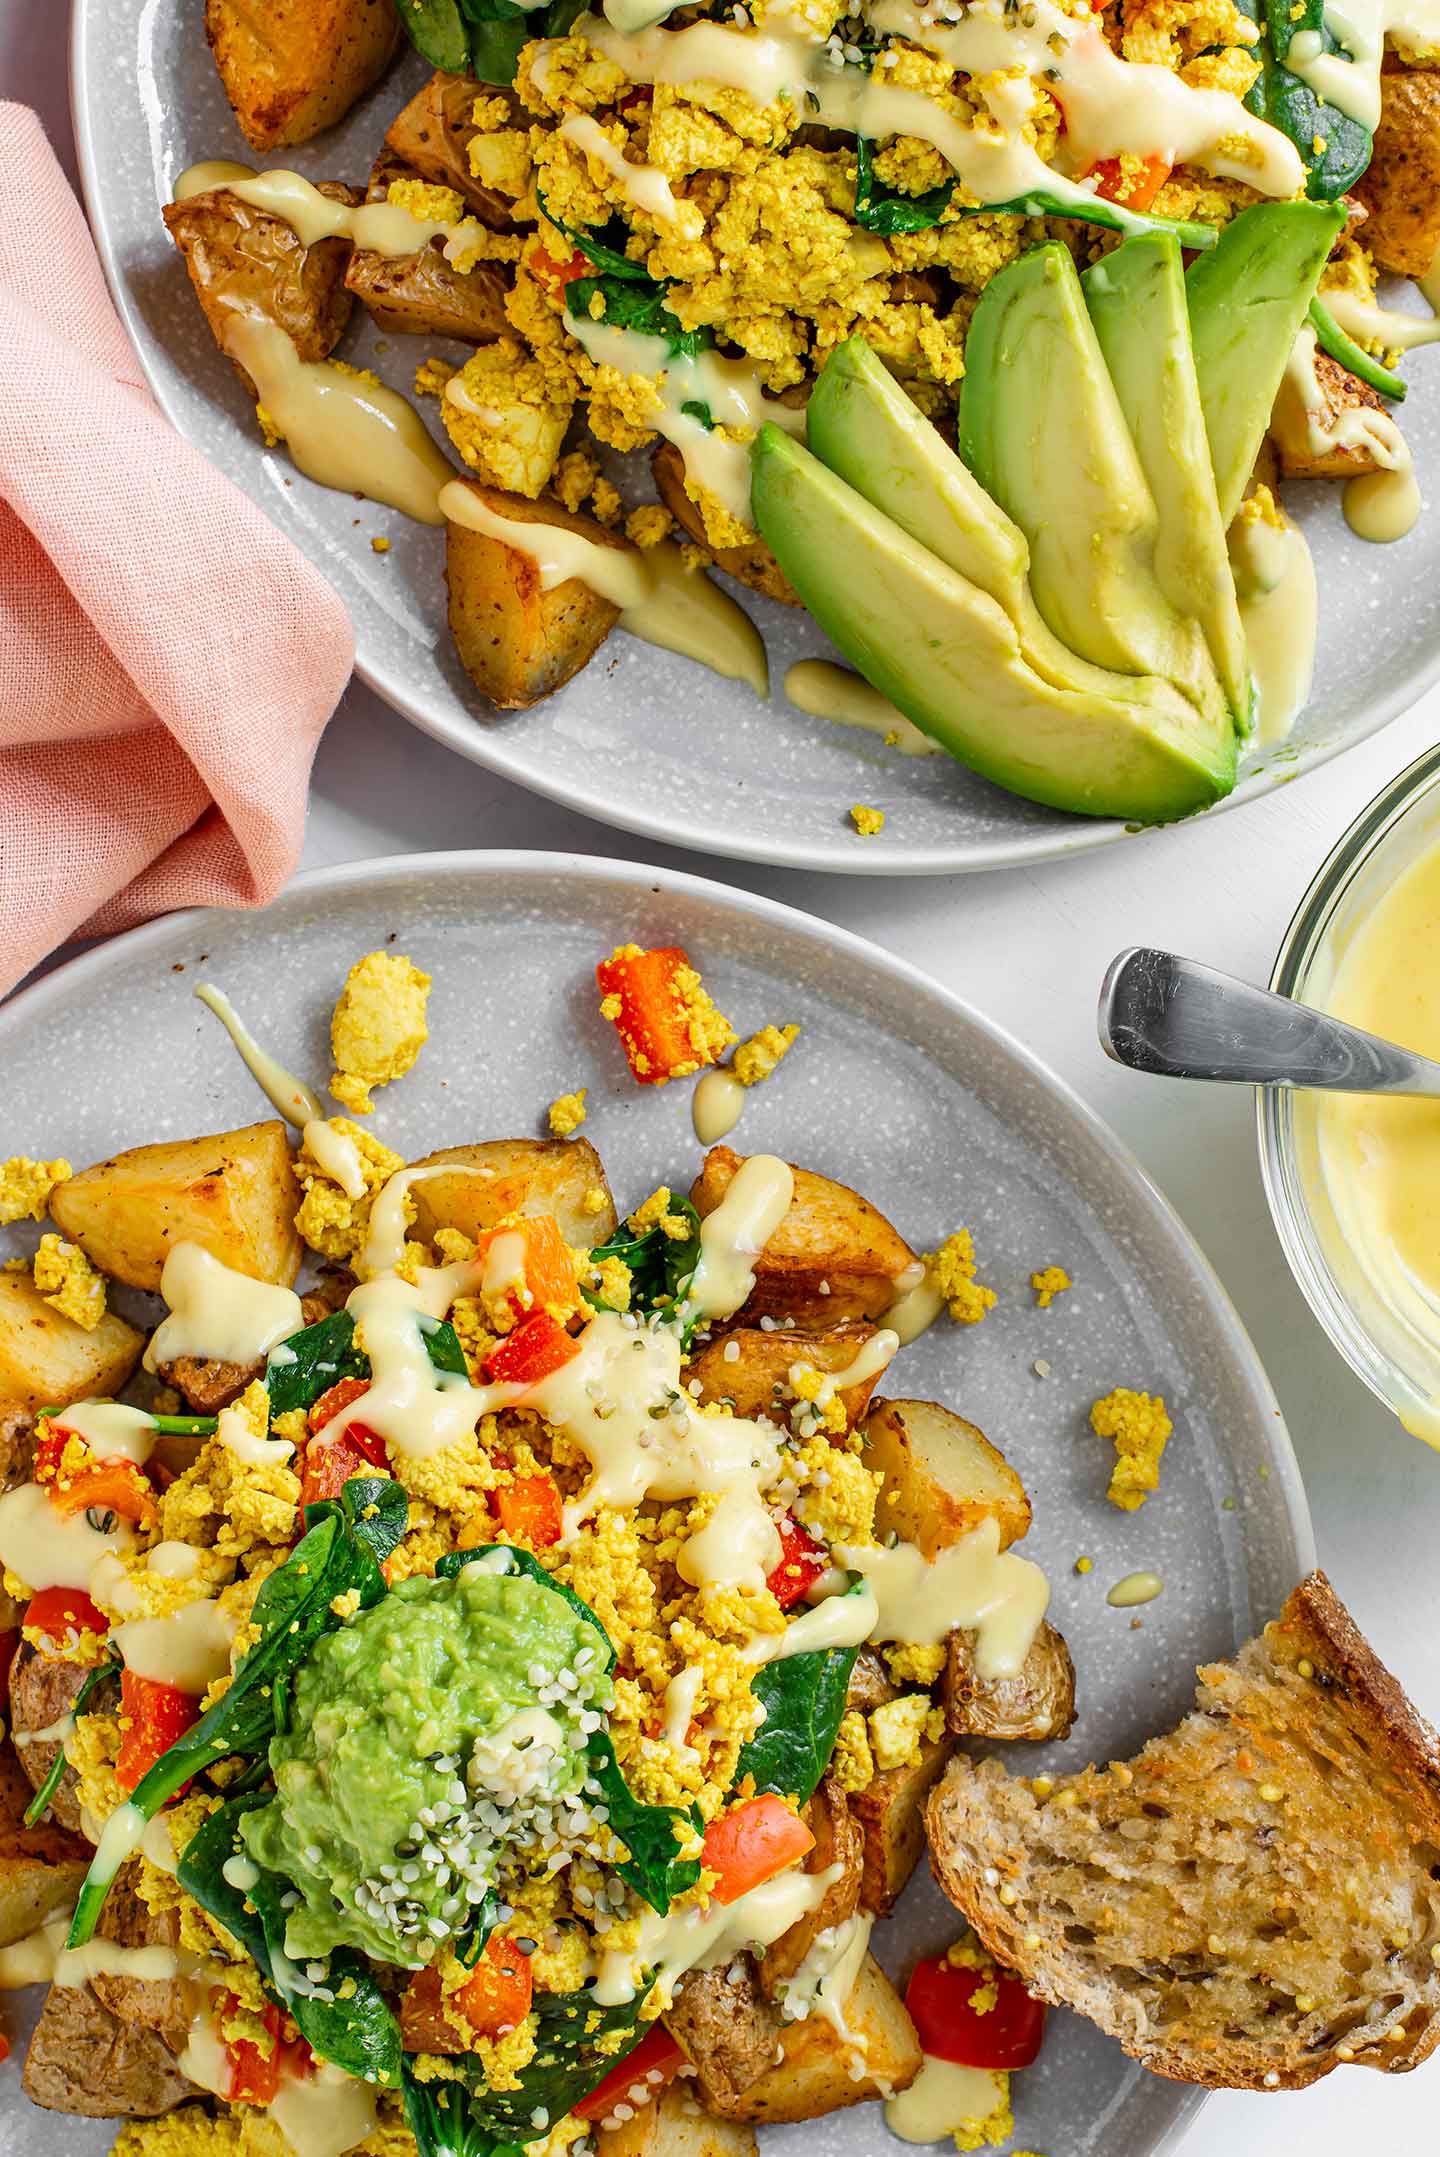 Top down view of ultimate scramble and spuds breakfast bowl with mashed avocado and drizzled queso. Another bowl with sliced avocado fills the top of the image.